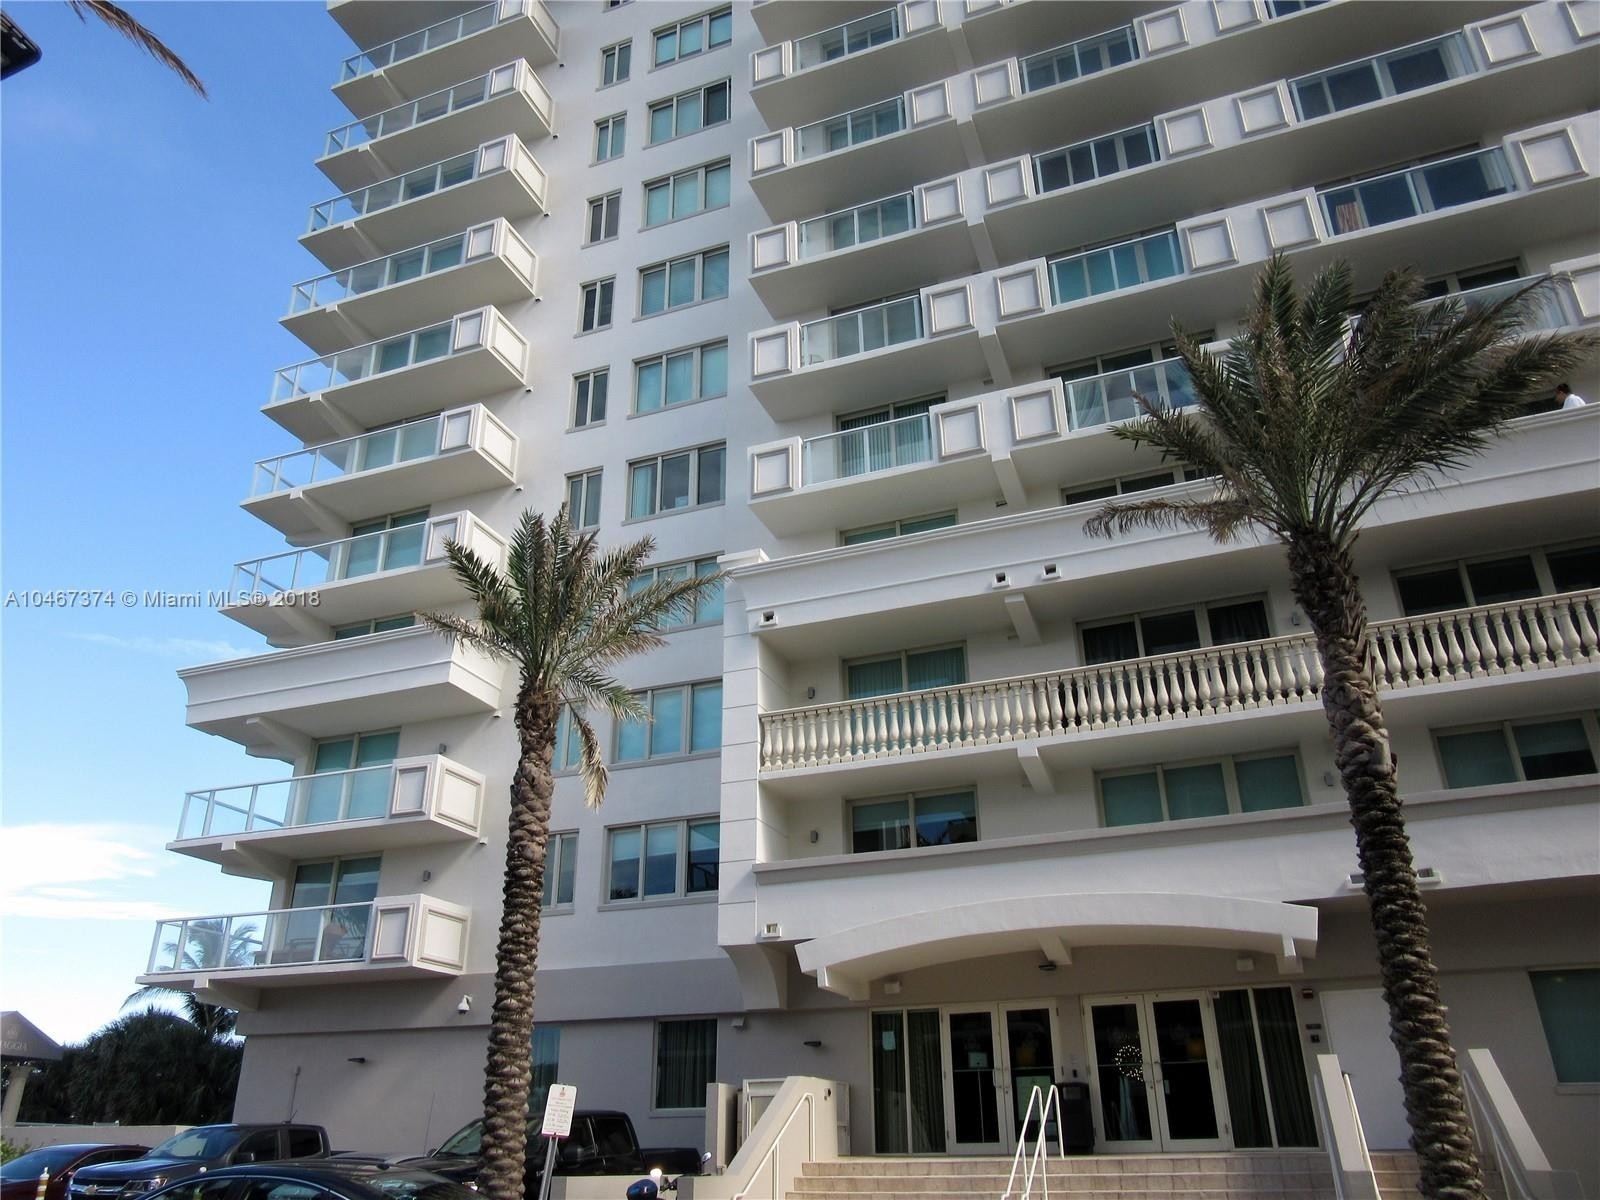 37. Condominiums at 9499 Collins Ave, 508 Surfside